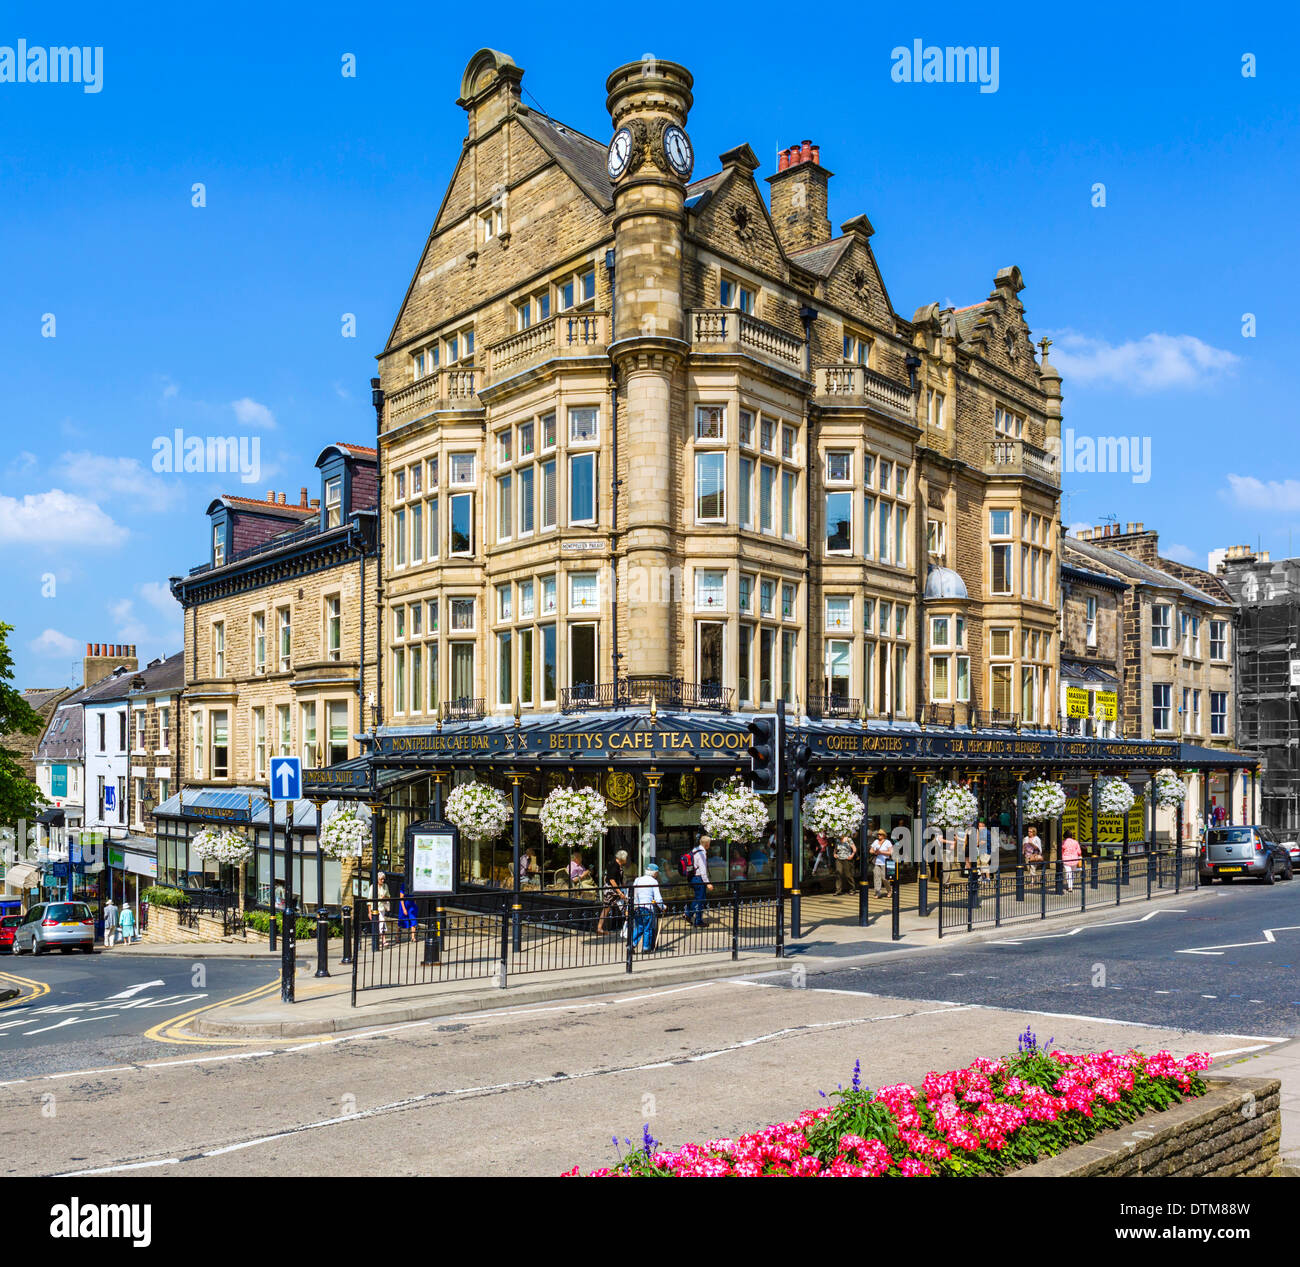 The famous Bettys Cafe Tea Rooms, Parliament Street, Harrogate, North Yorkshire, England, UK Stock Photo